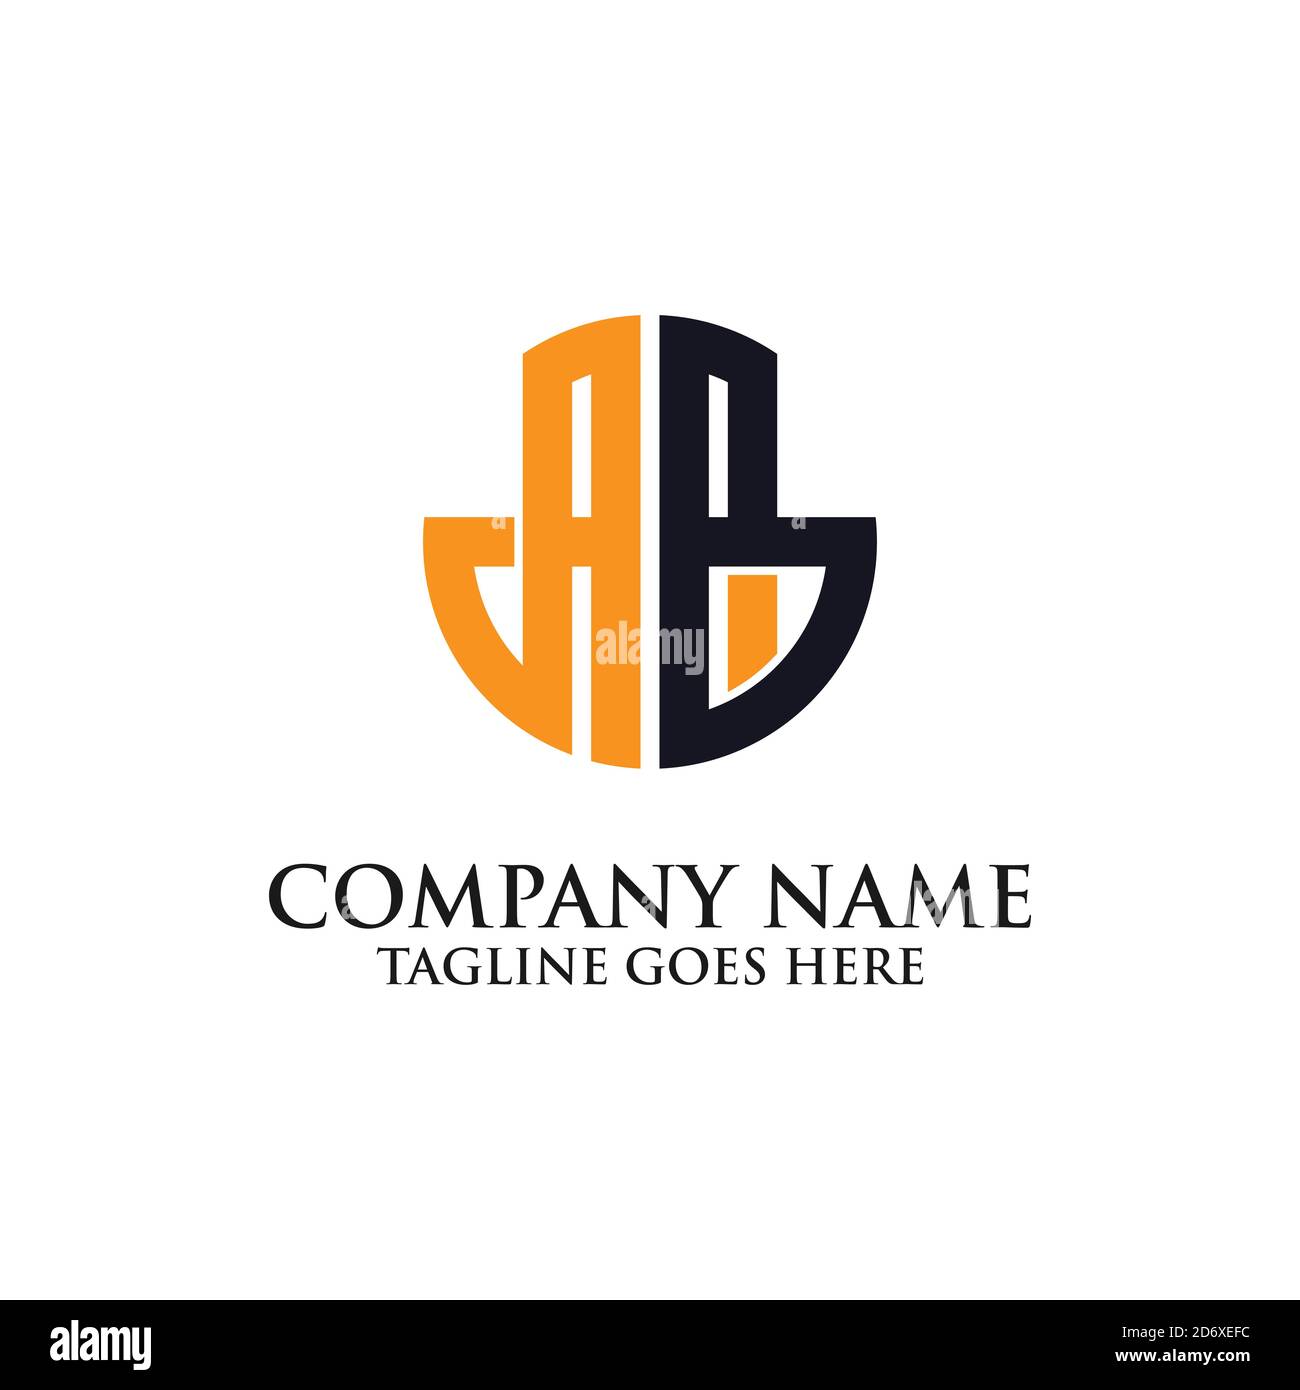 vector illustration initial AB logo inspiration, good for business company logo Stock Vector